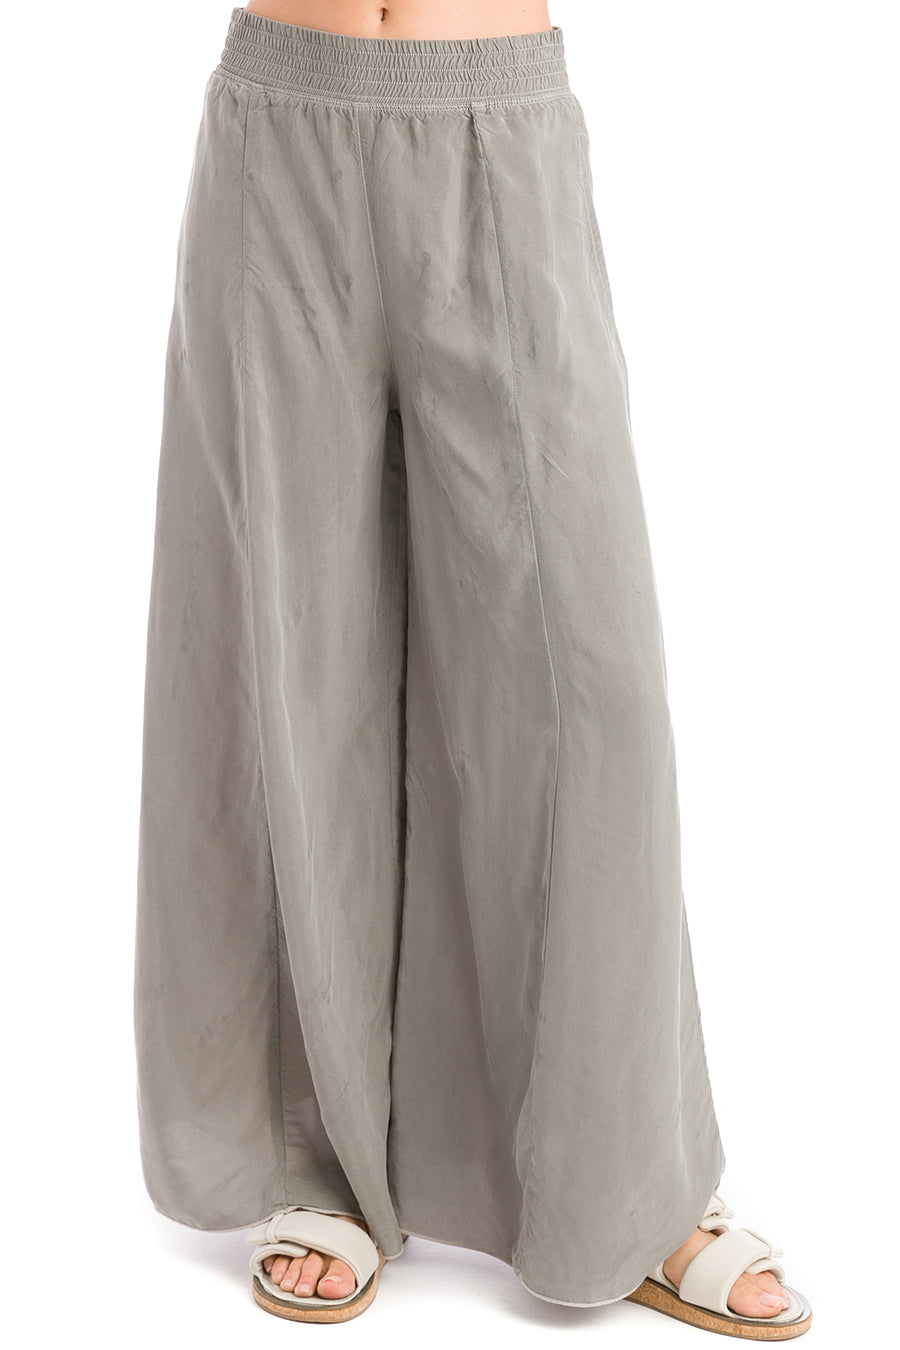 Hard Tail Forever Floaty Pants - Nickel